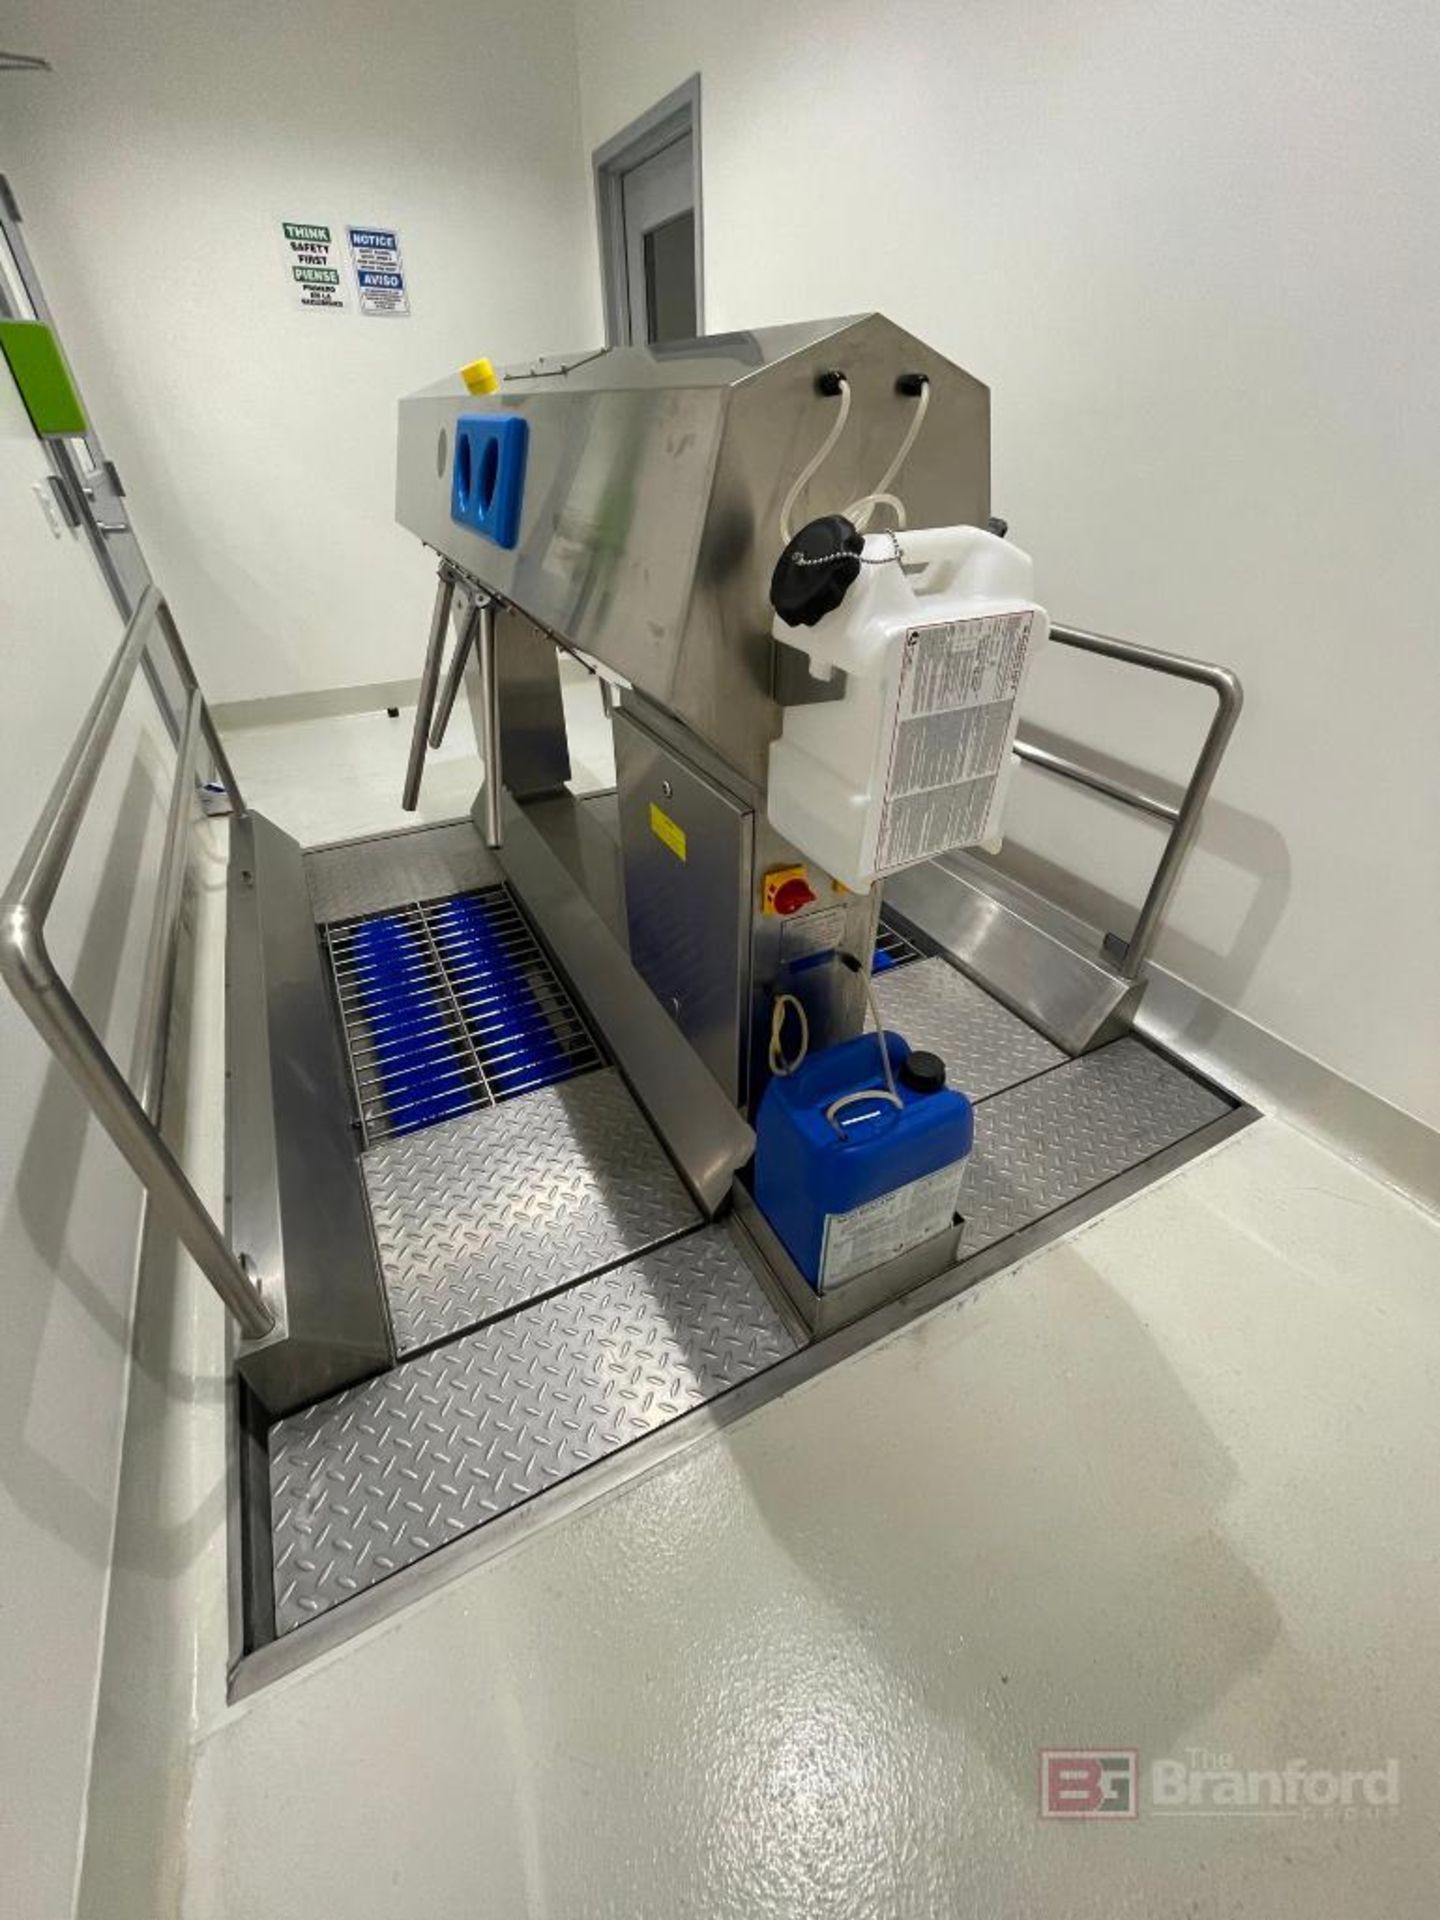 2020 ITEC Frontmatec Hygiene Systems Automatic Walk-Through Sole and Boot Cleaning Machine - Image 4 of 5